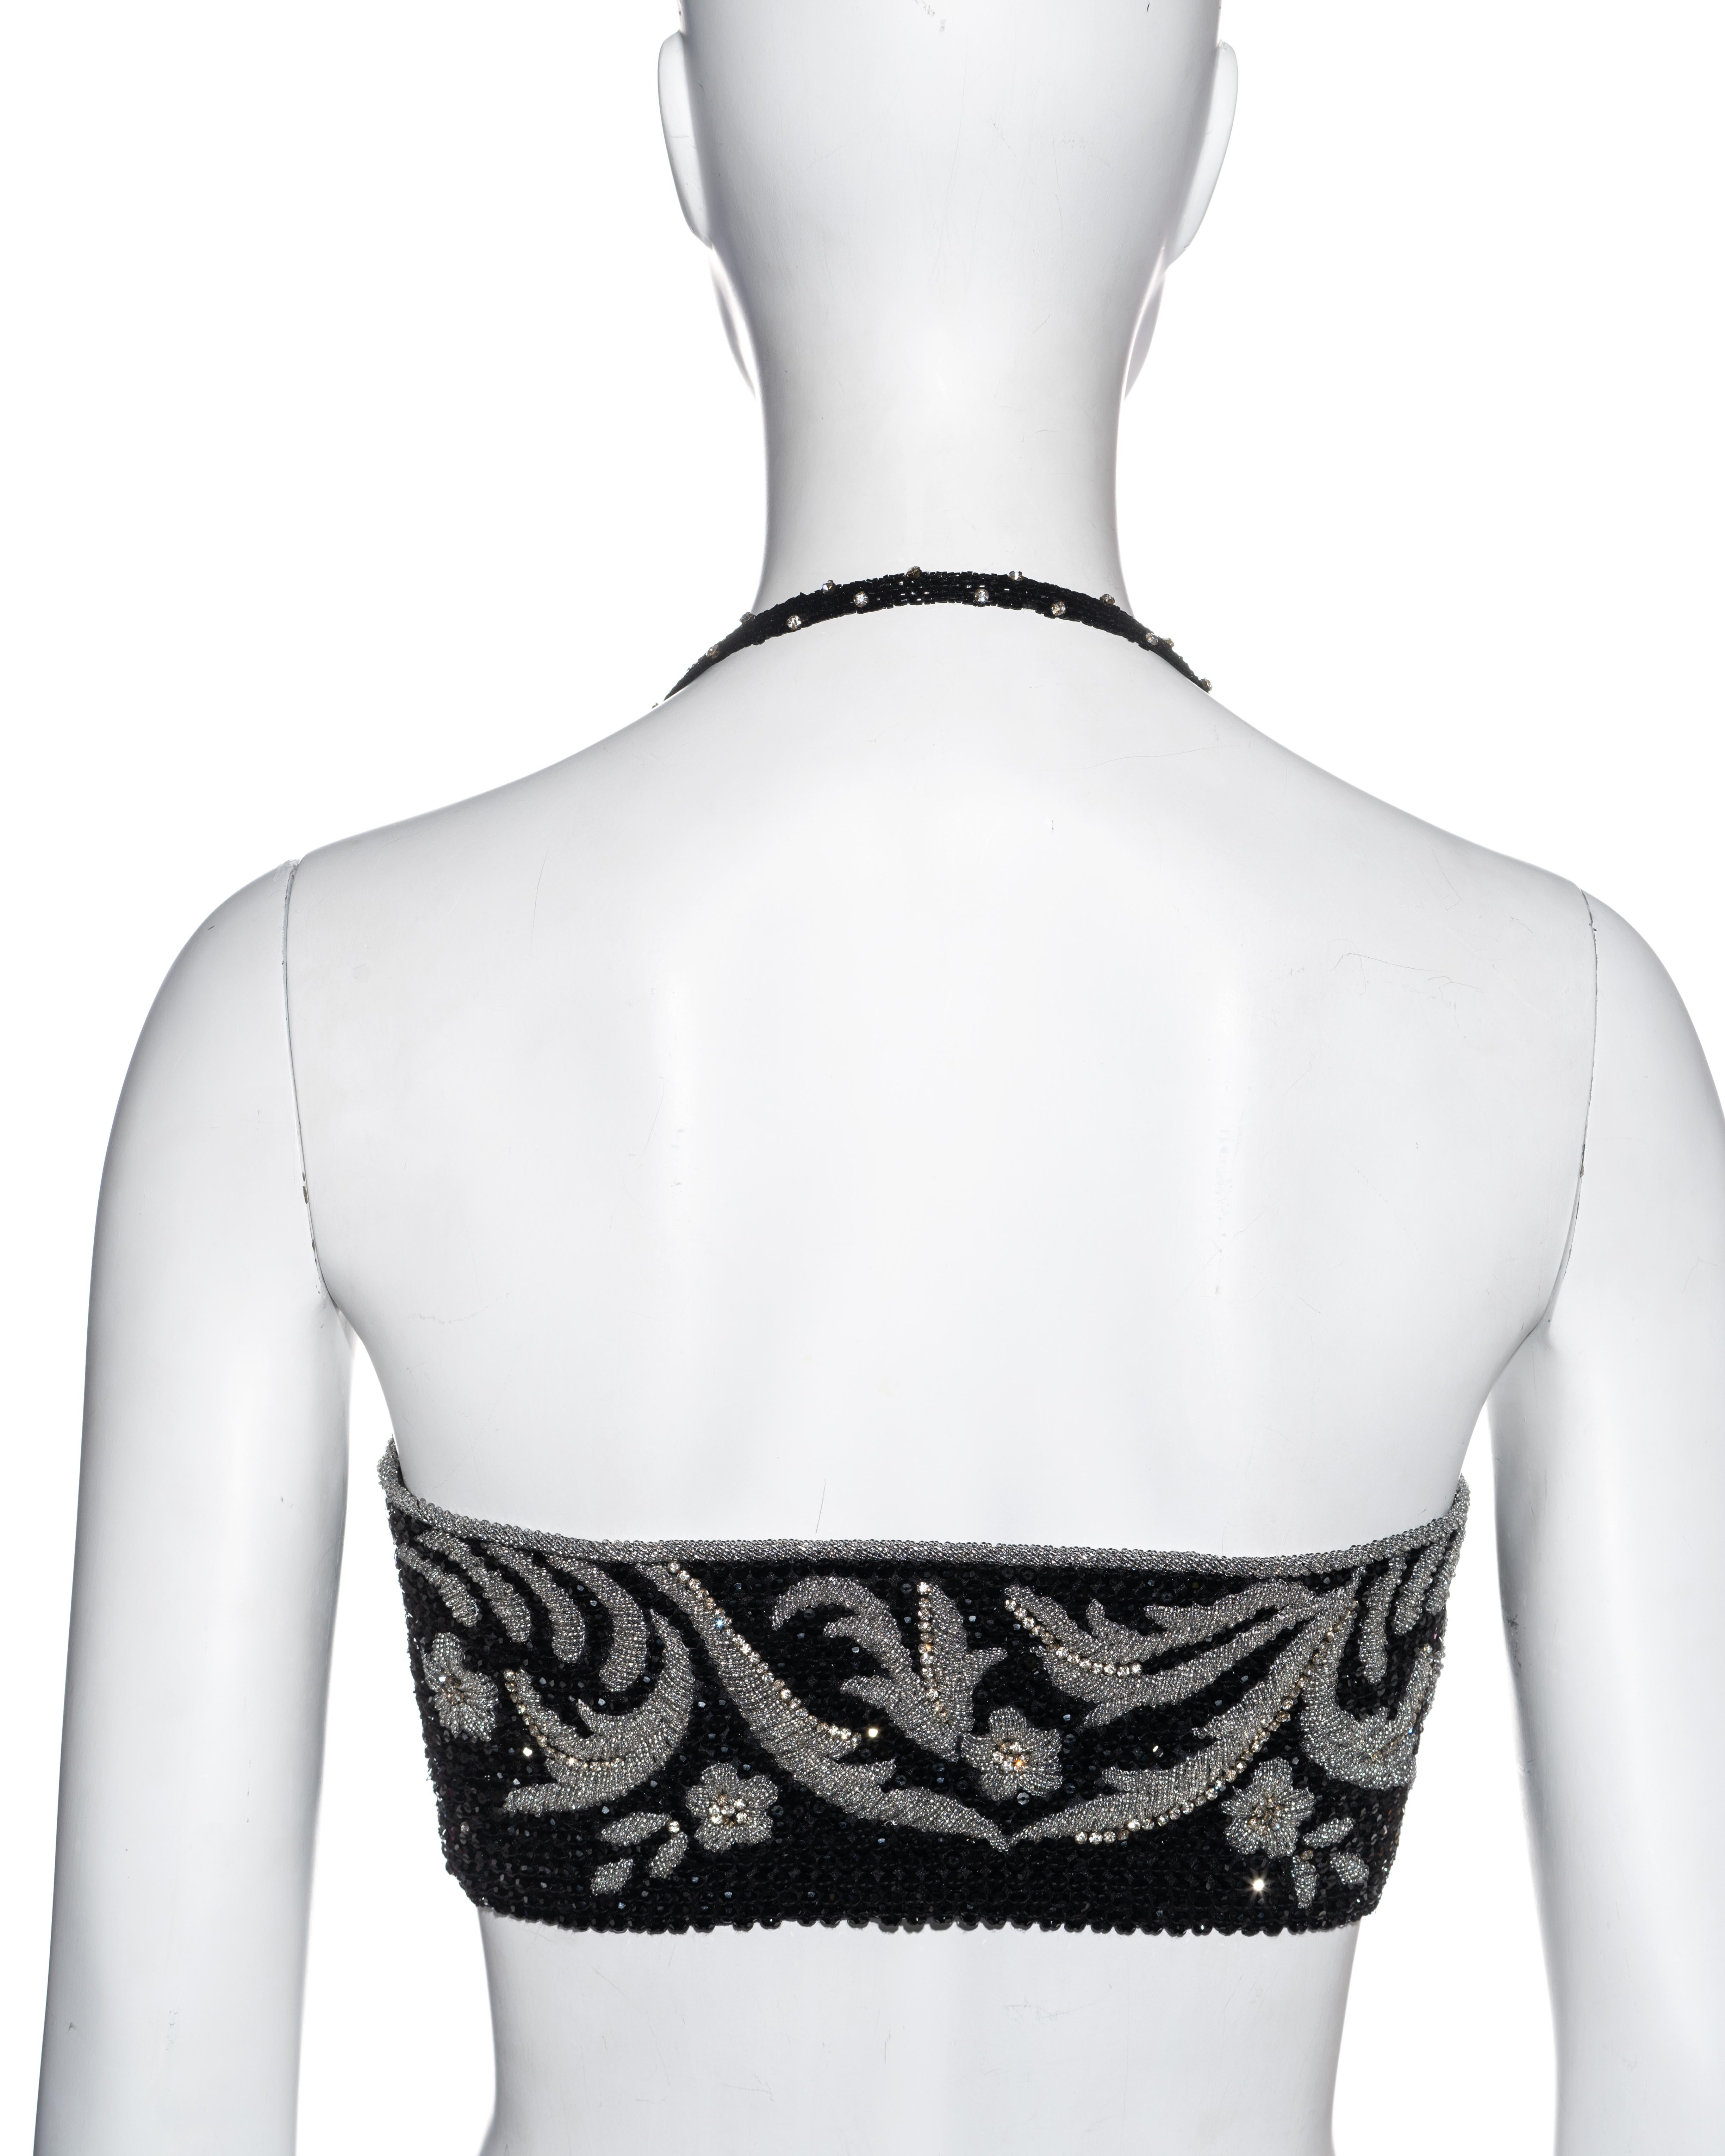 Gianni Versace beaded halterneck corset bra with crystal embellishment, fw 1989 In Excellent Condition For Sale In London, GB